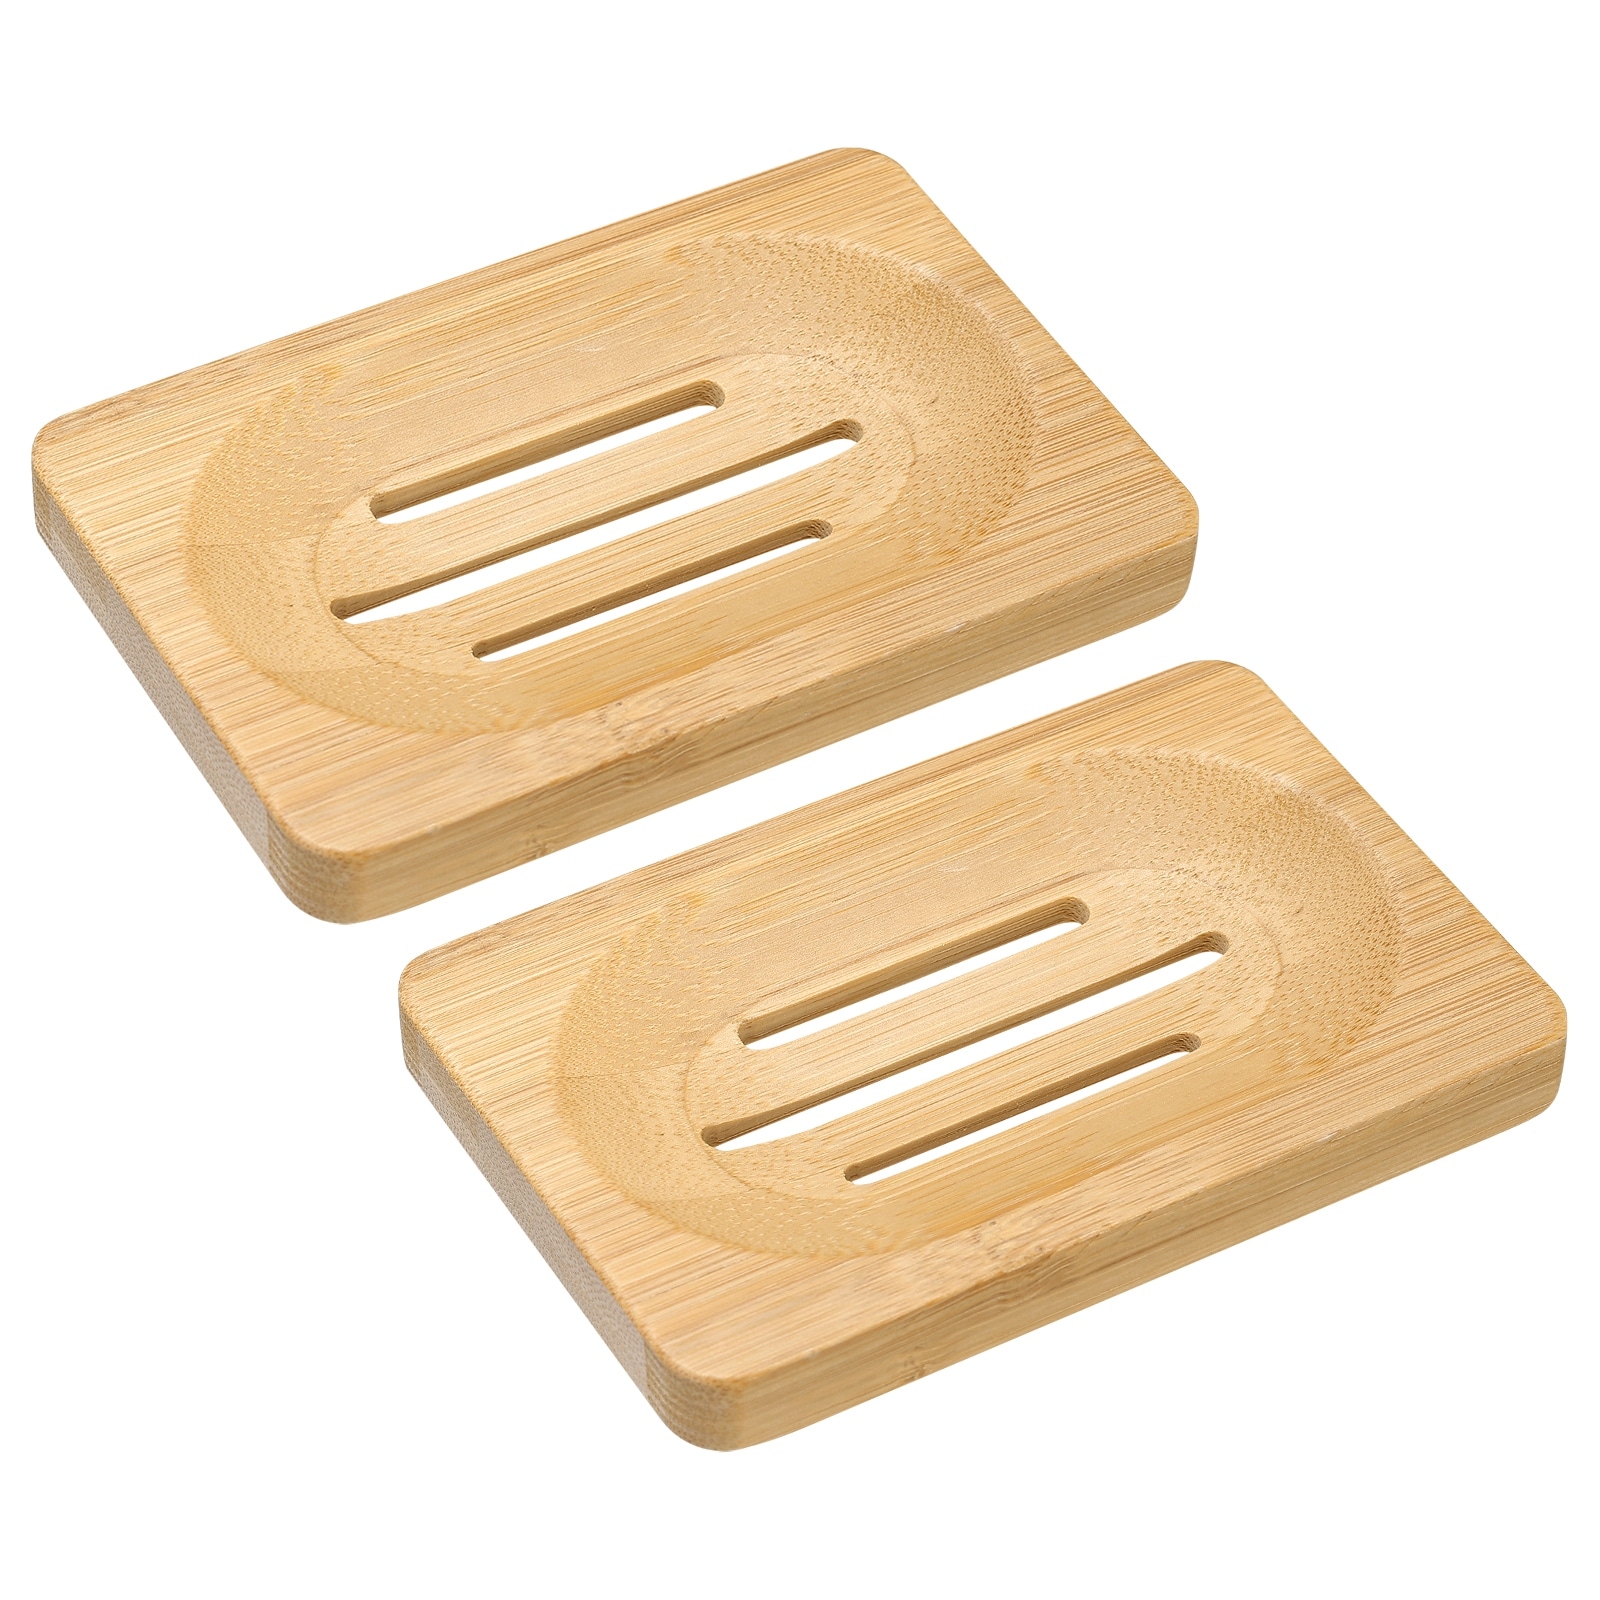 https://ak1.ostkcdn.com/images/products/is/images/direct/b06a5dbc87422344c4fc7a99cd91c17676b1c9d9/Wooden-Soap-Dish%2C-Natural-Bamboo-Soap-Tray-Soap-Saver-w-Self-Draining.jpg